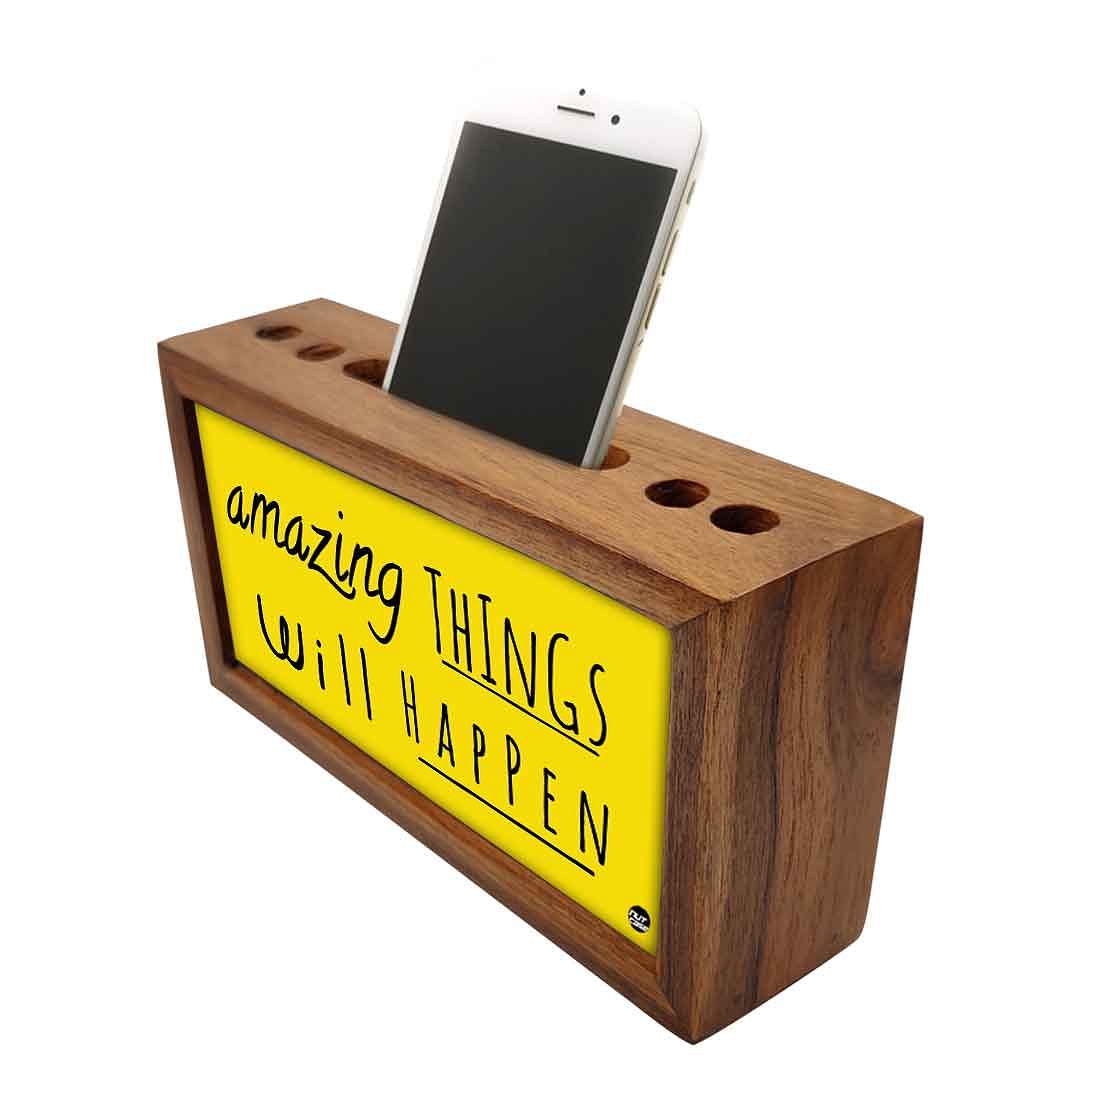 Wooden Desk Organizer Pen Mobile Stand - Amazing Things Will Happen Nutcase